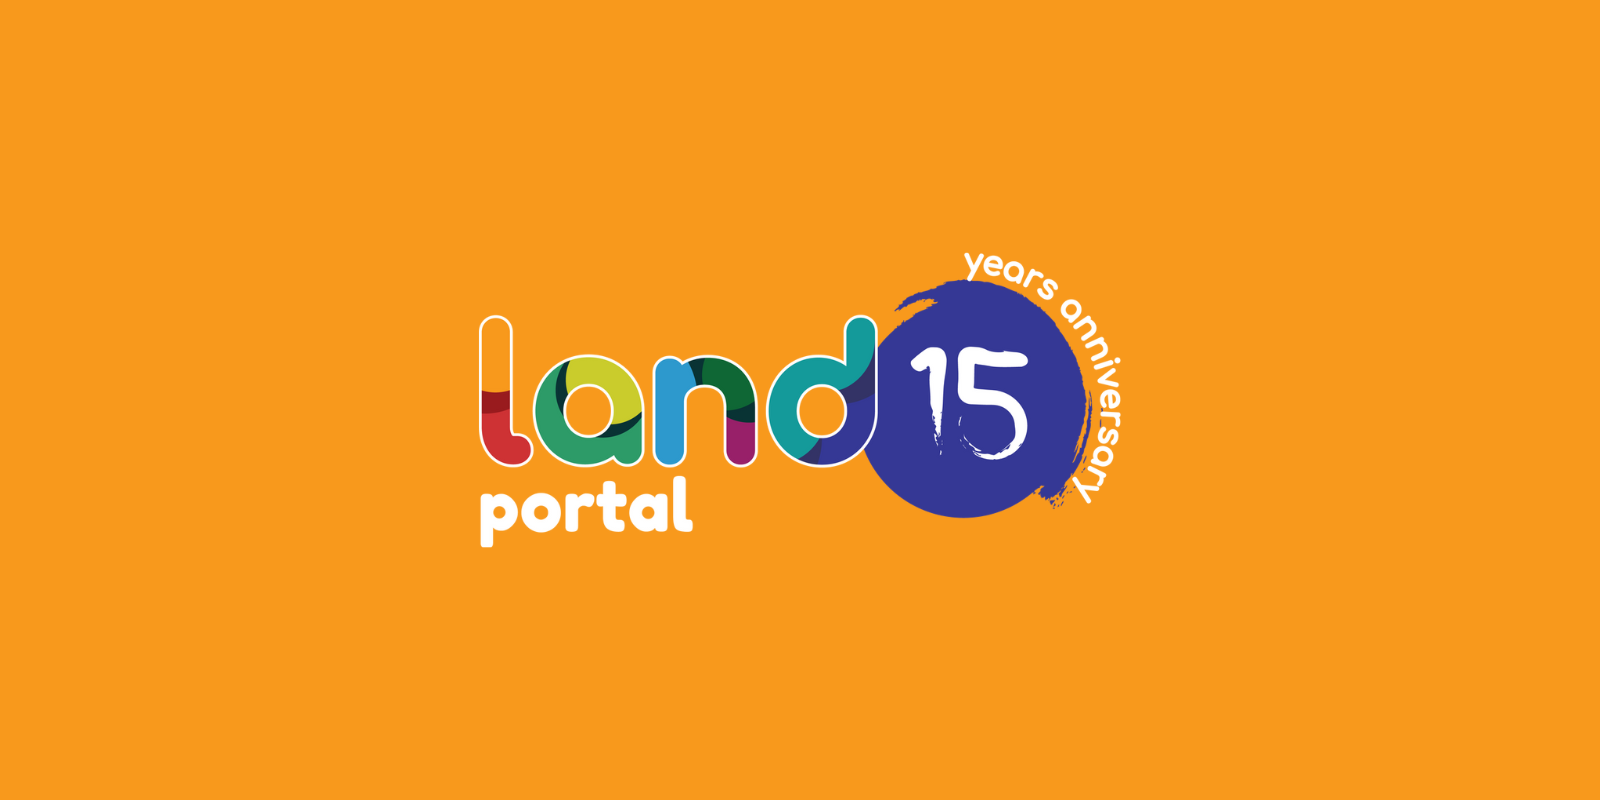 15th Anniversary of the Land Portal